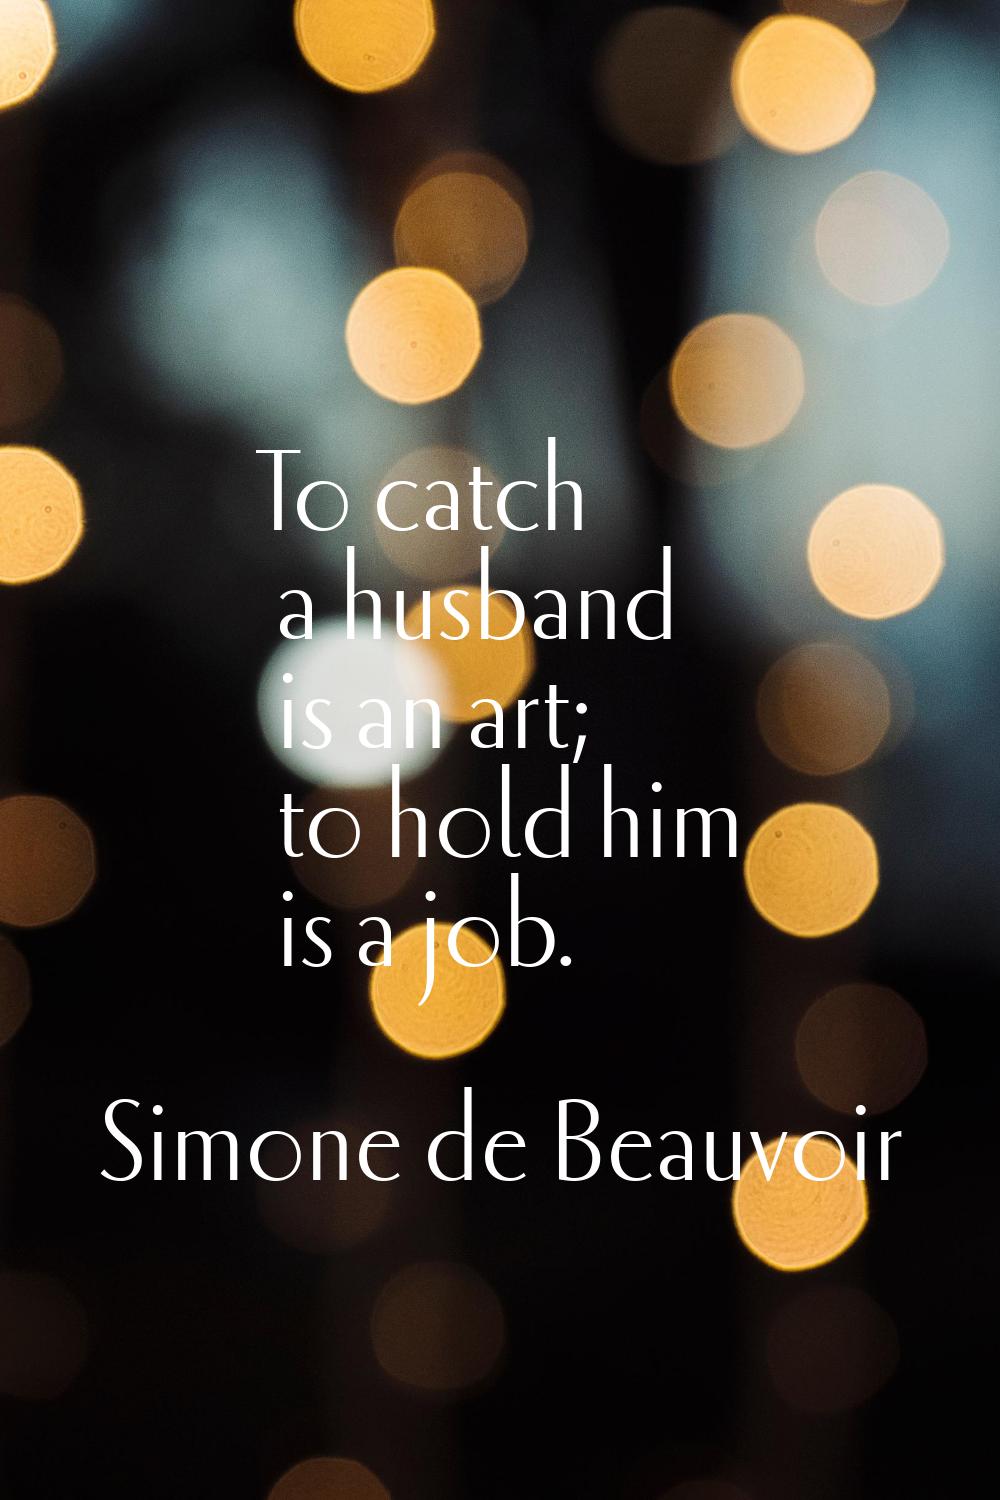 To catch a husband is an art; to hold him is a job.